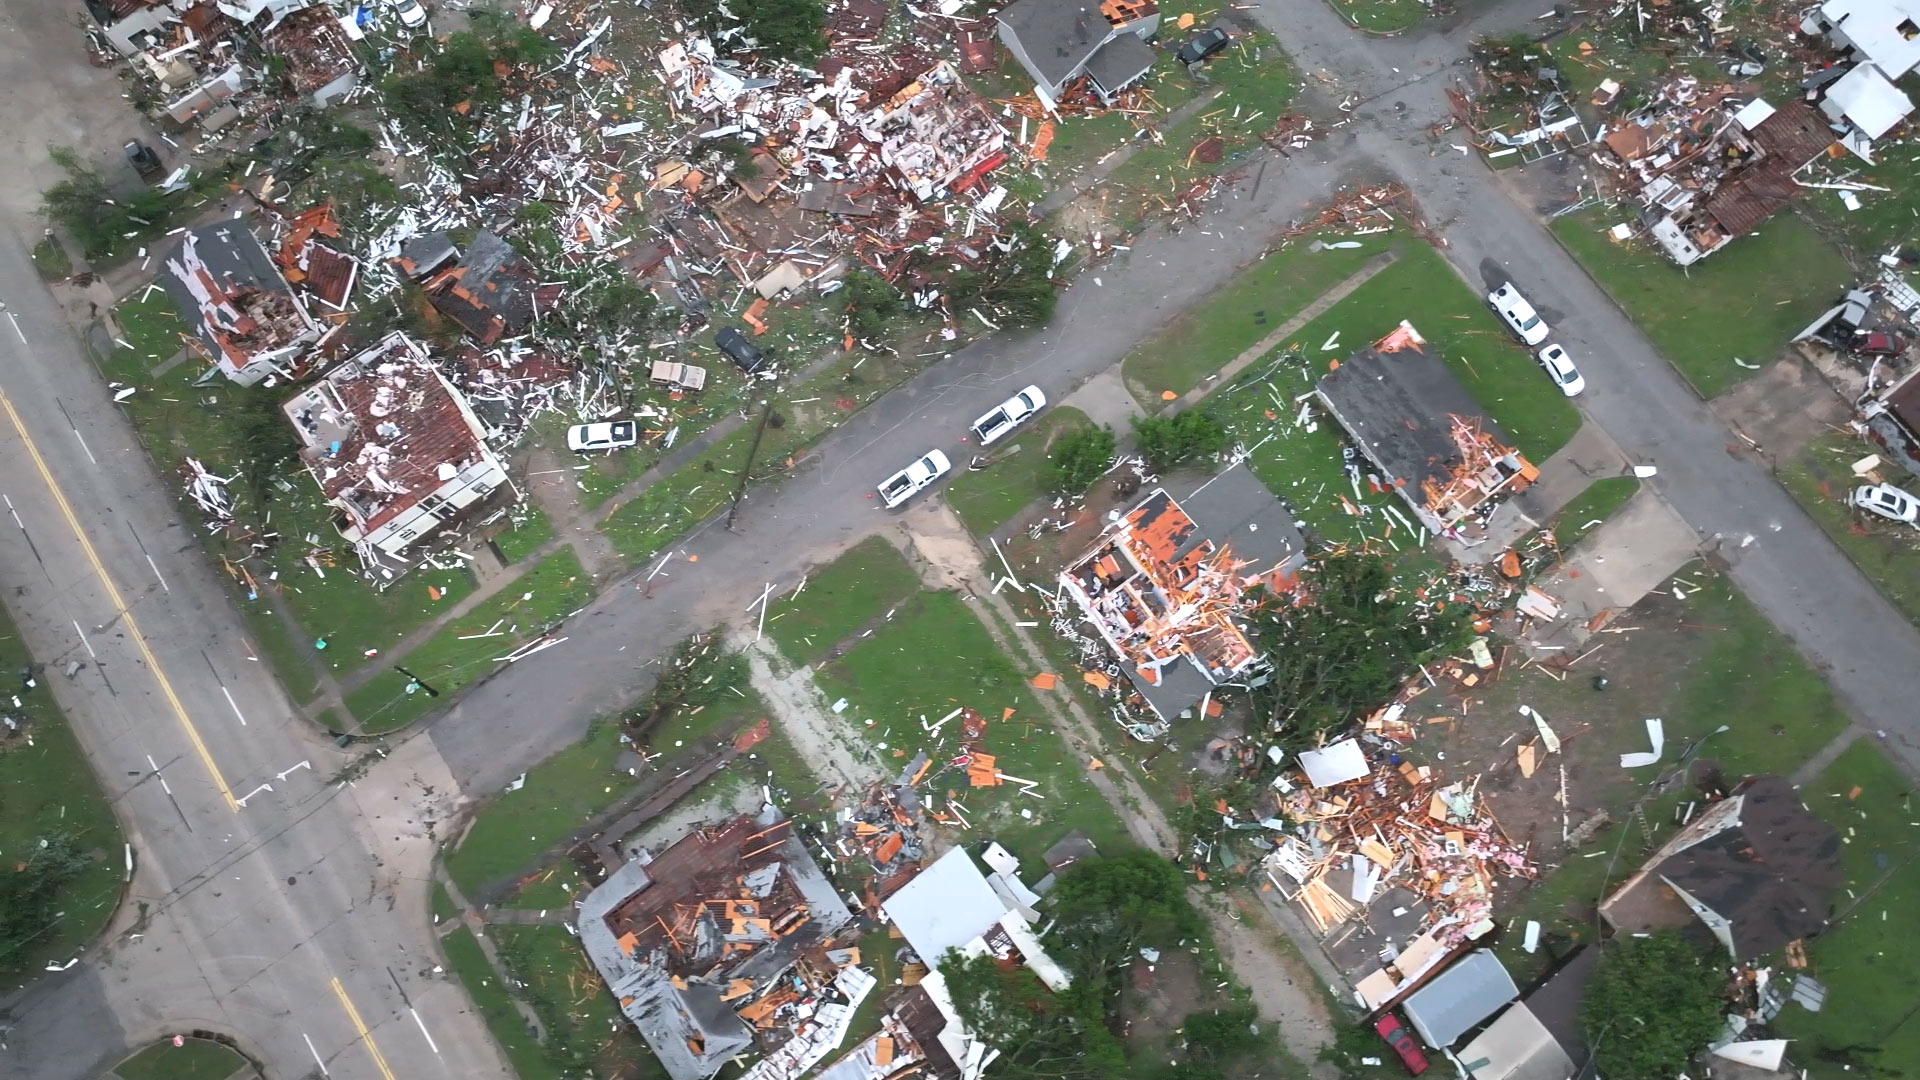 Aerial drone view of partially residential blocks flattened following the tornado passage.